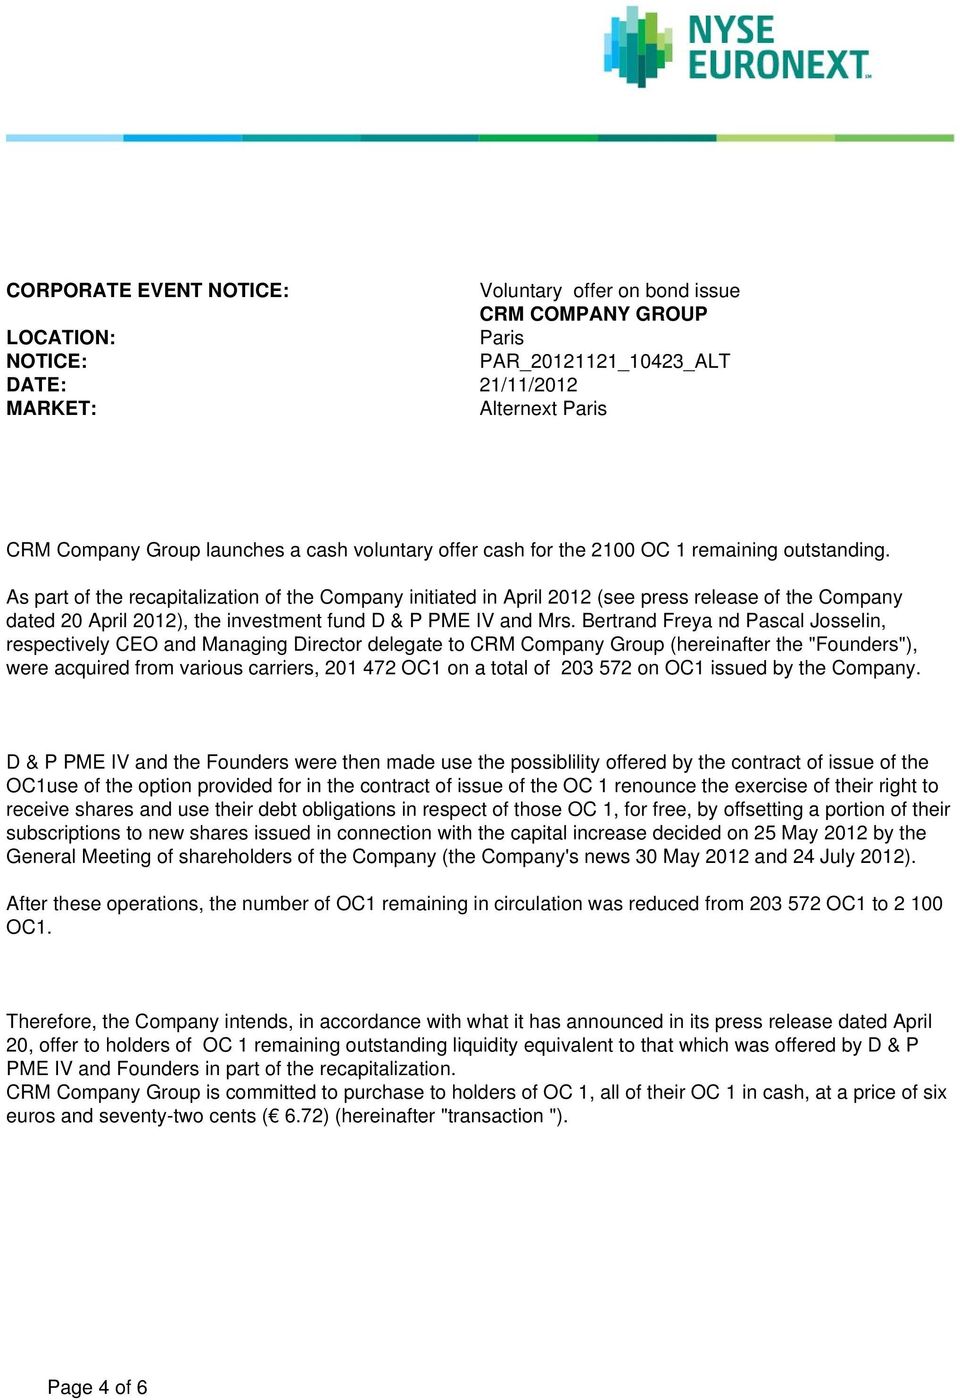 As part of the recapitalization of the Company initiated in April 2012 (see press release of the Company dated 20 April 2012), the investment fund D & P PME IV and Mrs.